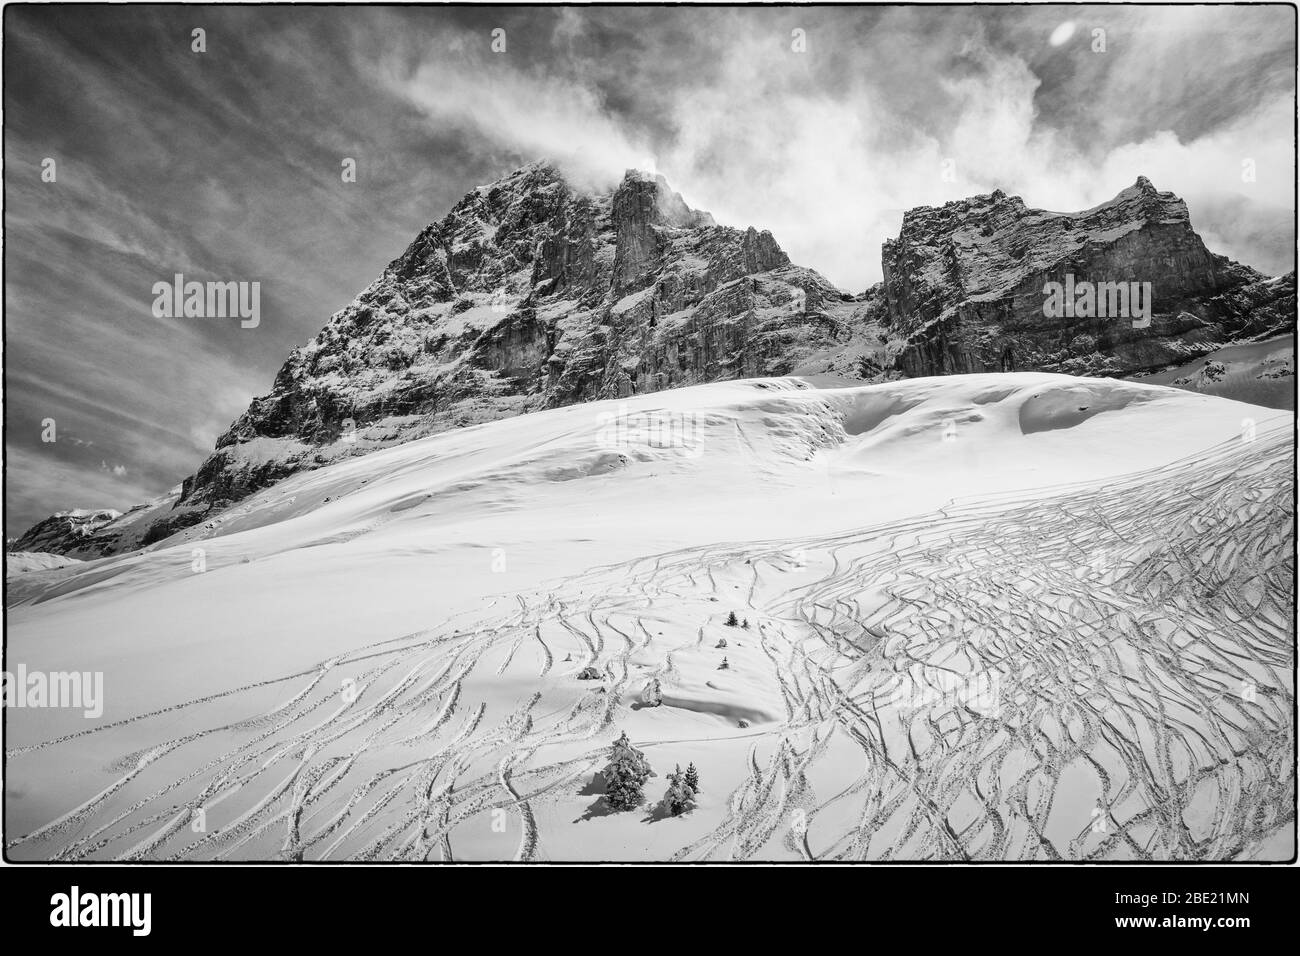 Eiger north face with snowstorm and traces of skiers Stock Photo